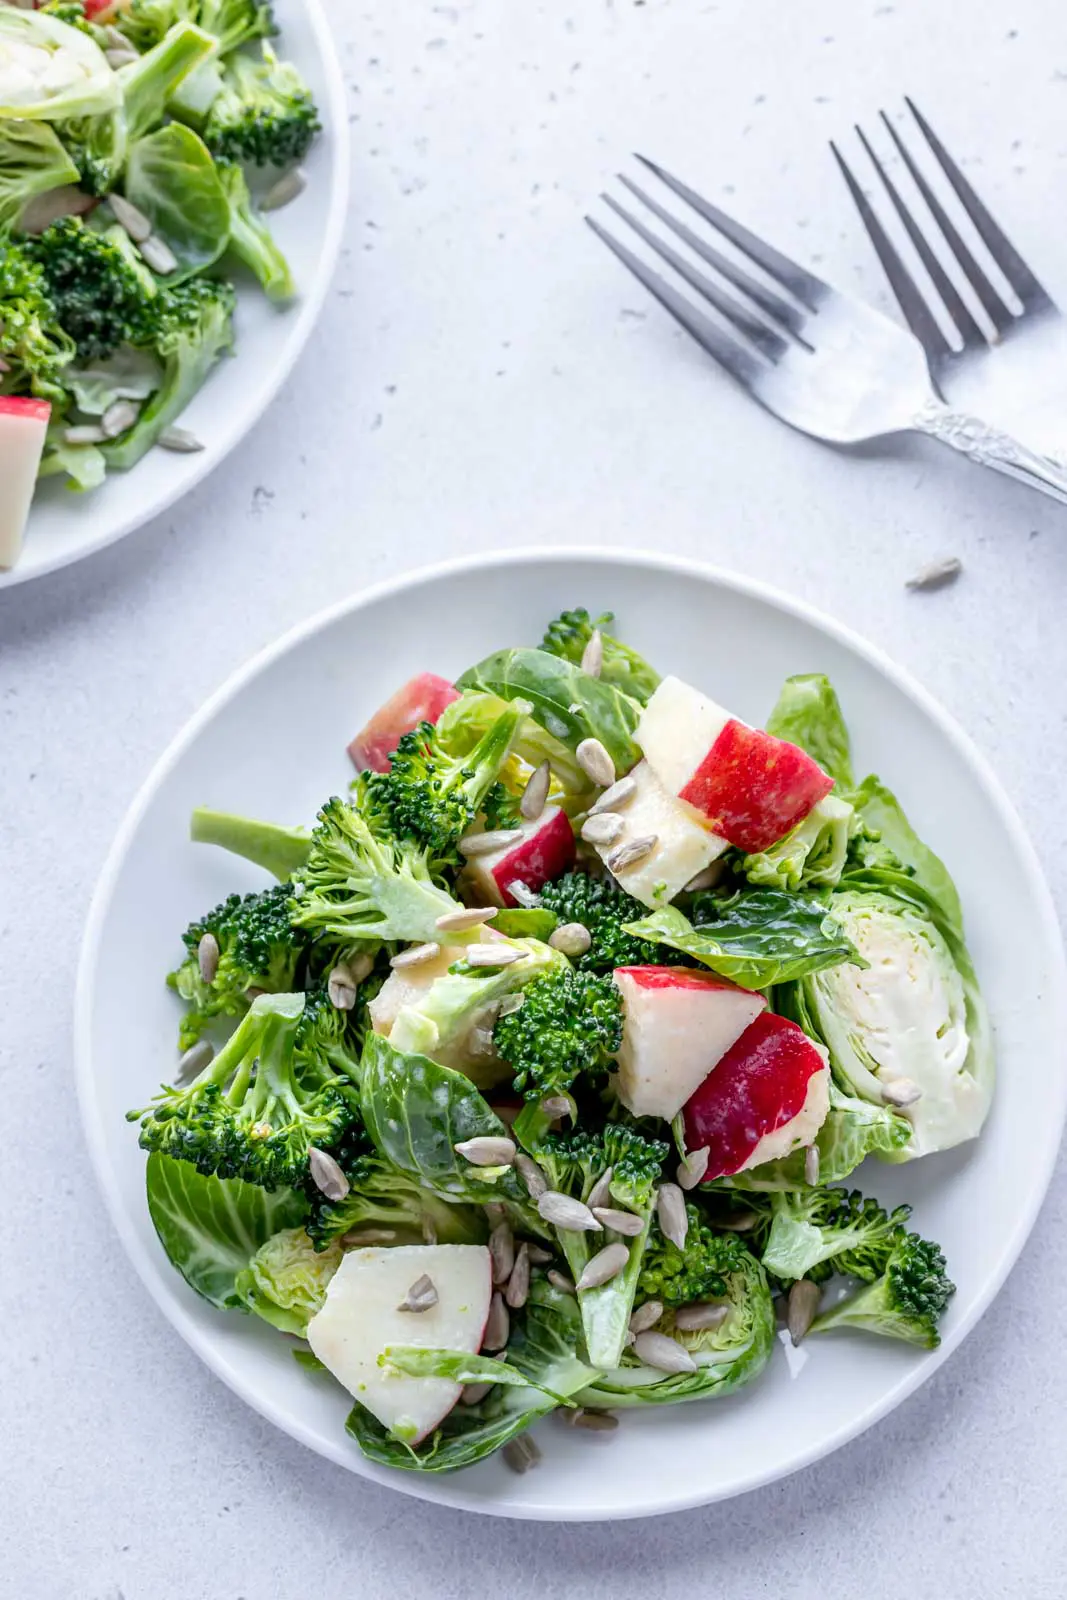 shaved brussels sprouts, broccoli and red apples on a plate